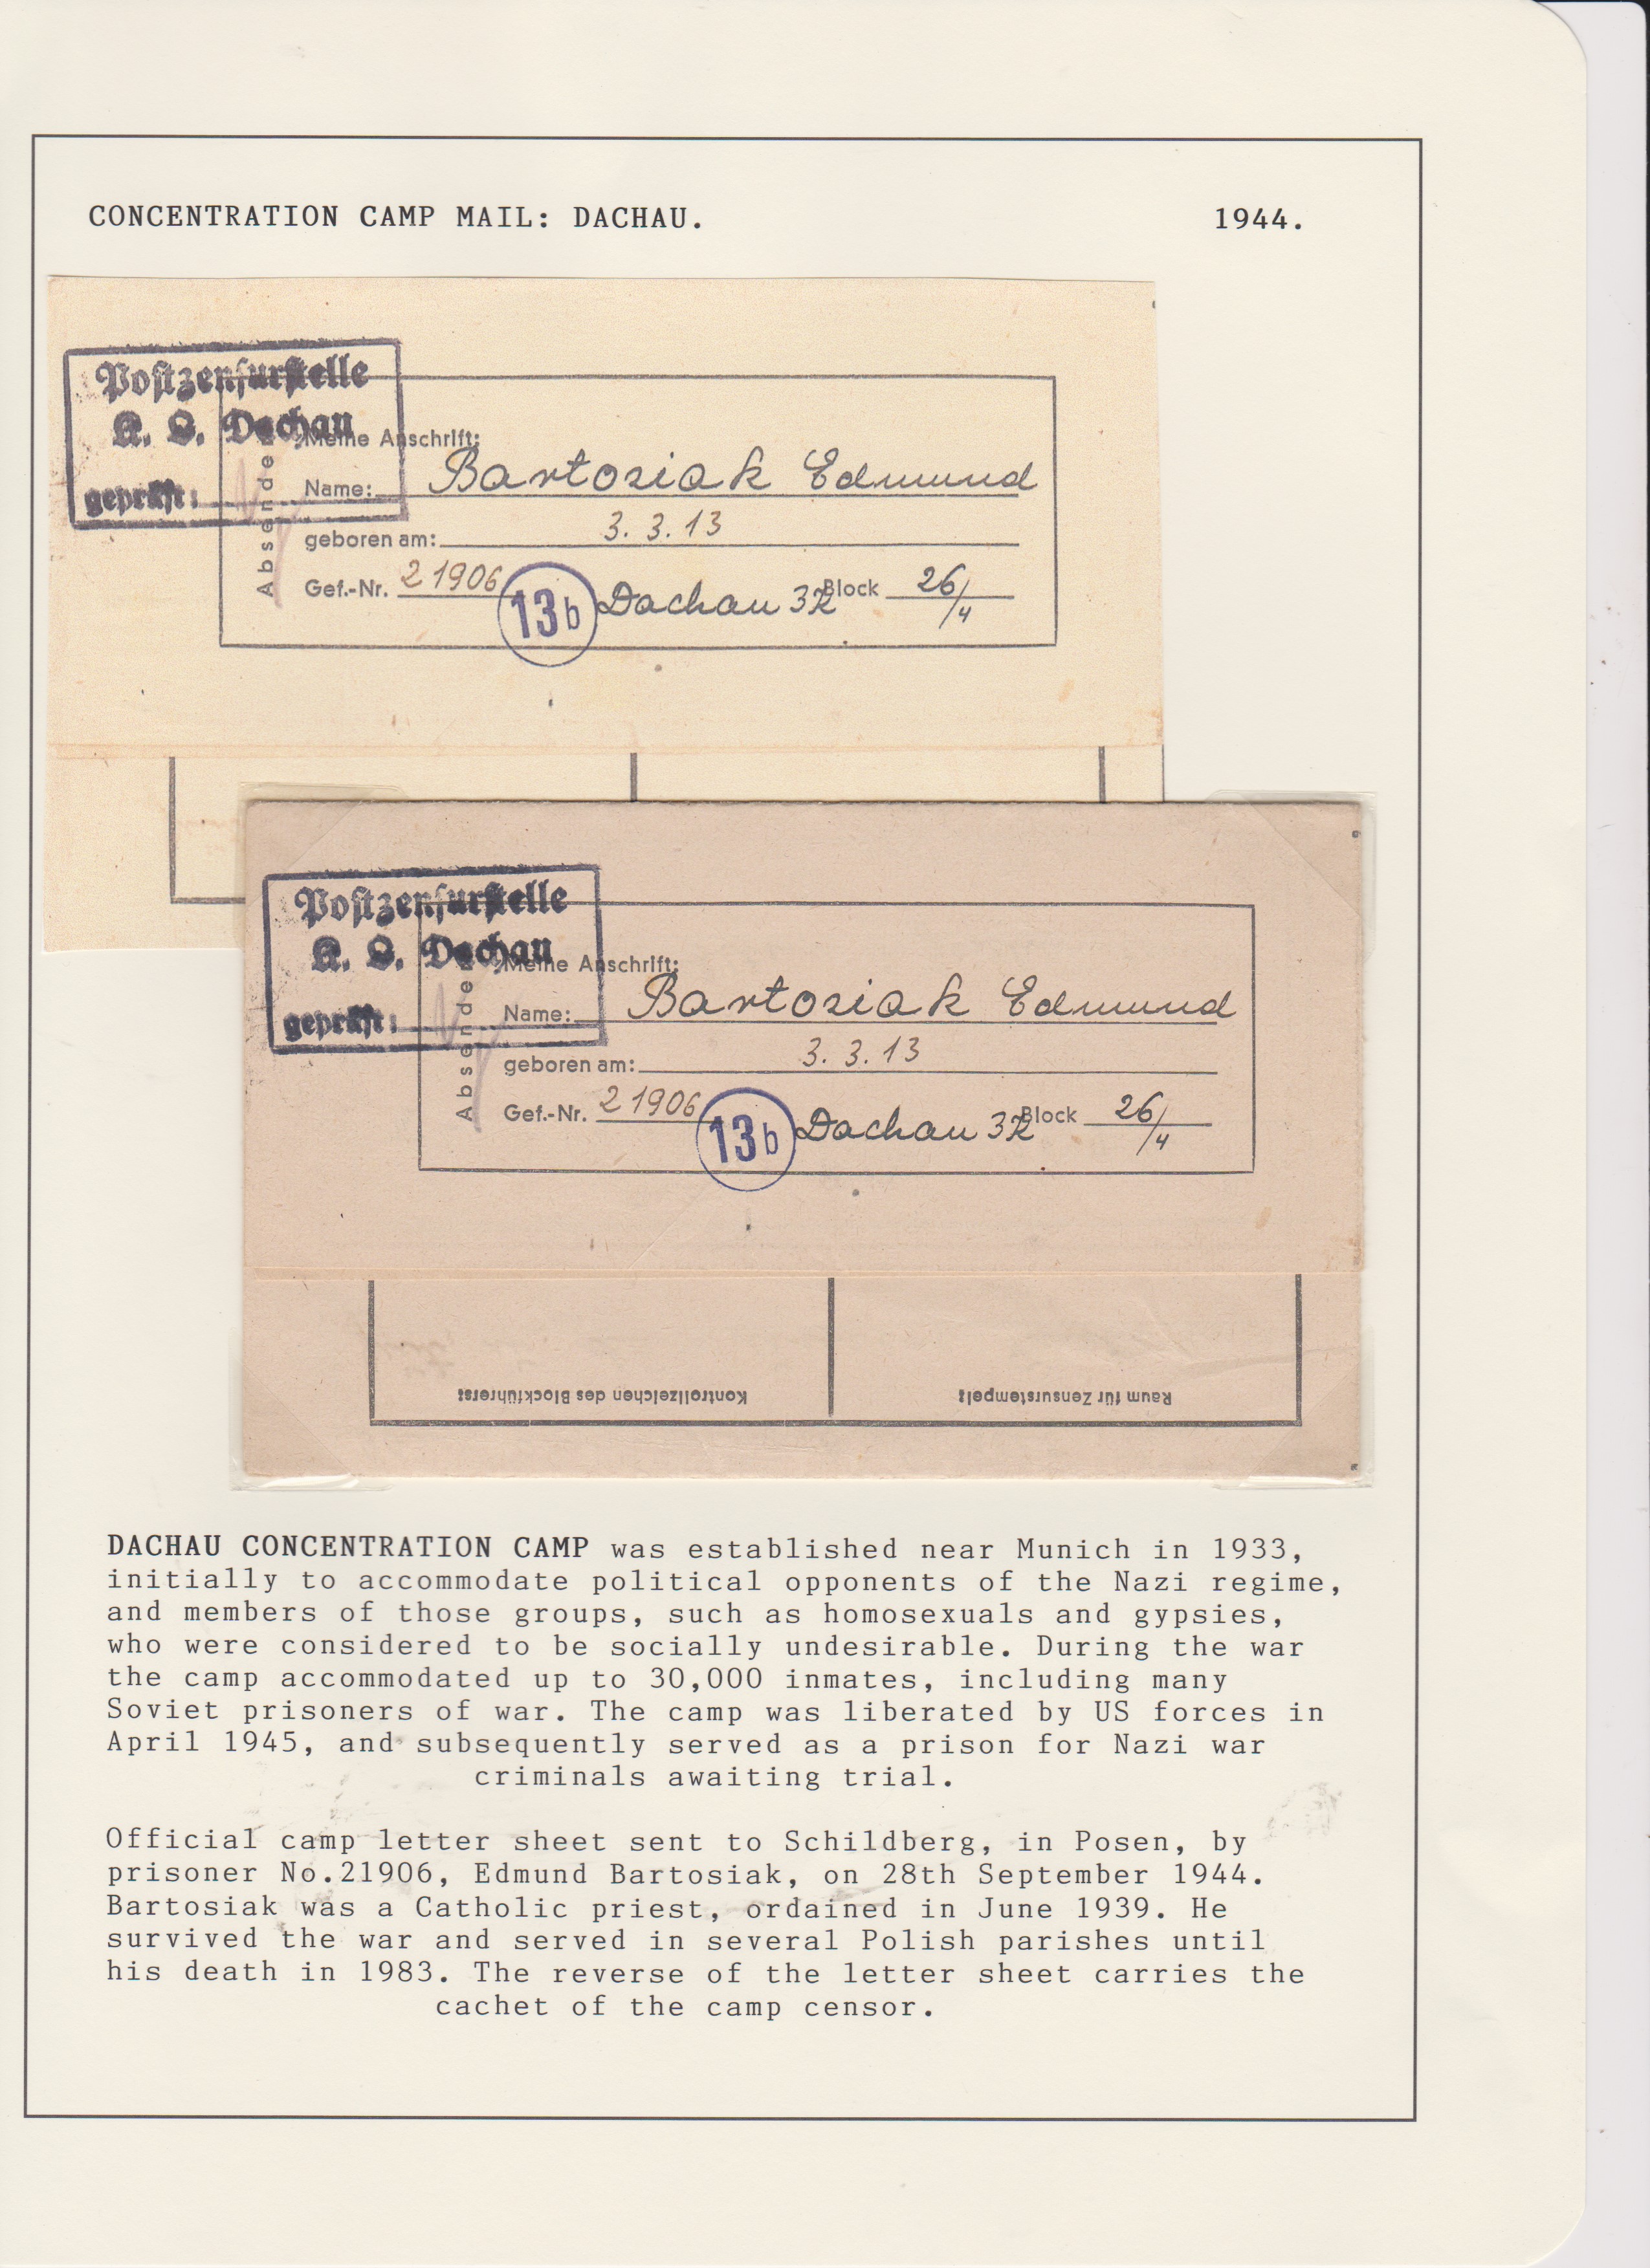 Germany 1944 Concentration Camp mail. Official Dachau Camp letter posted to Schildberg by a